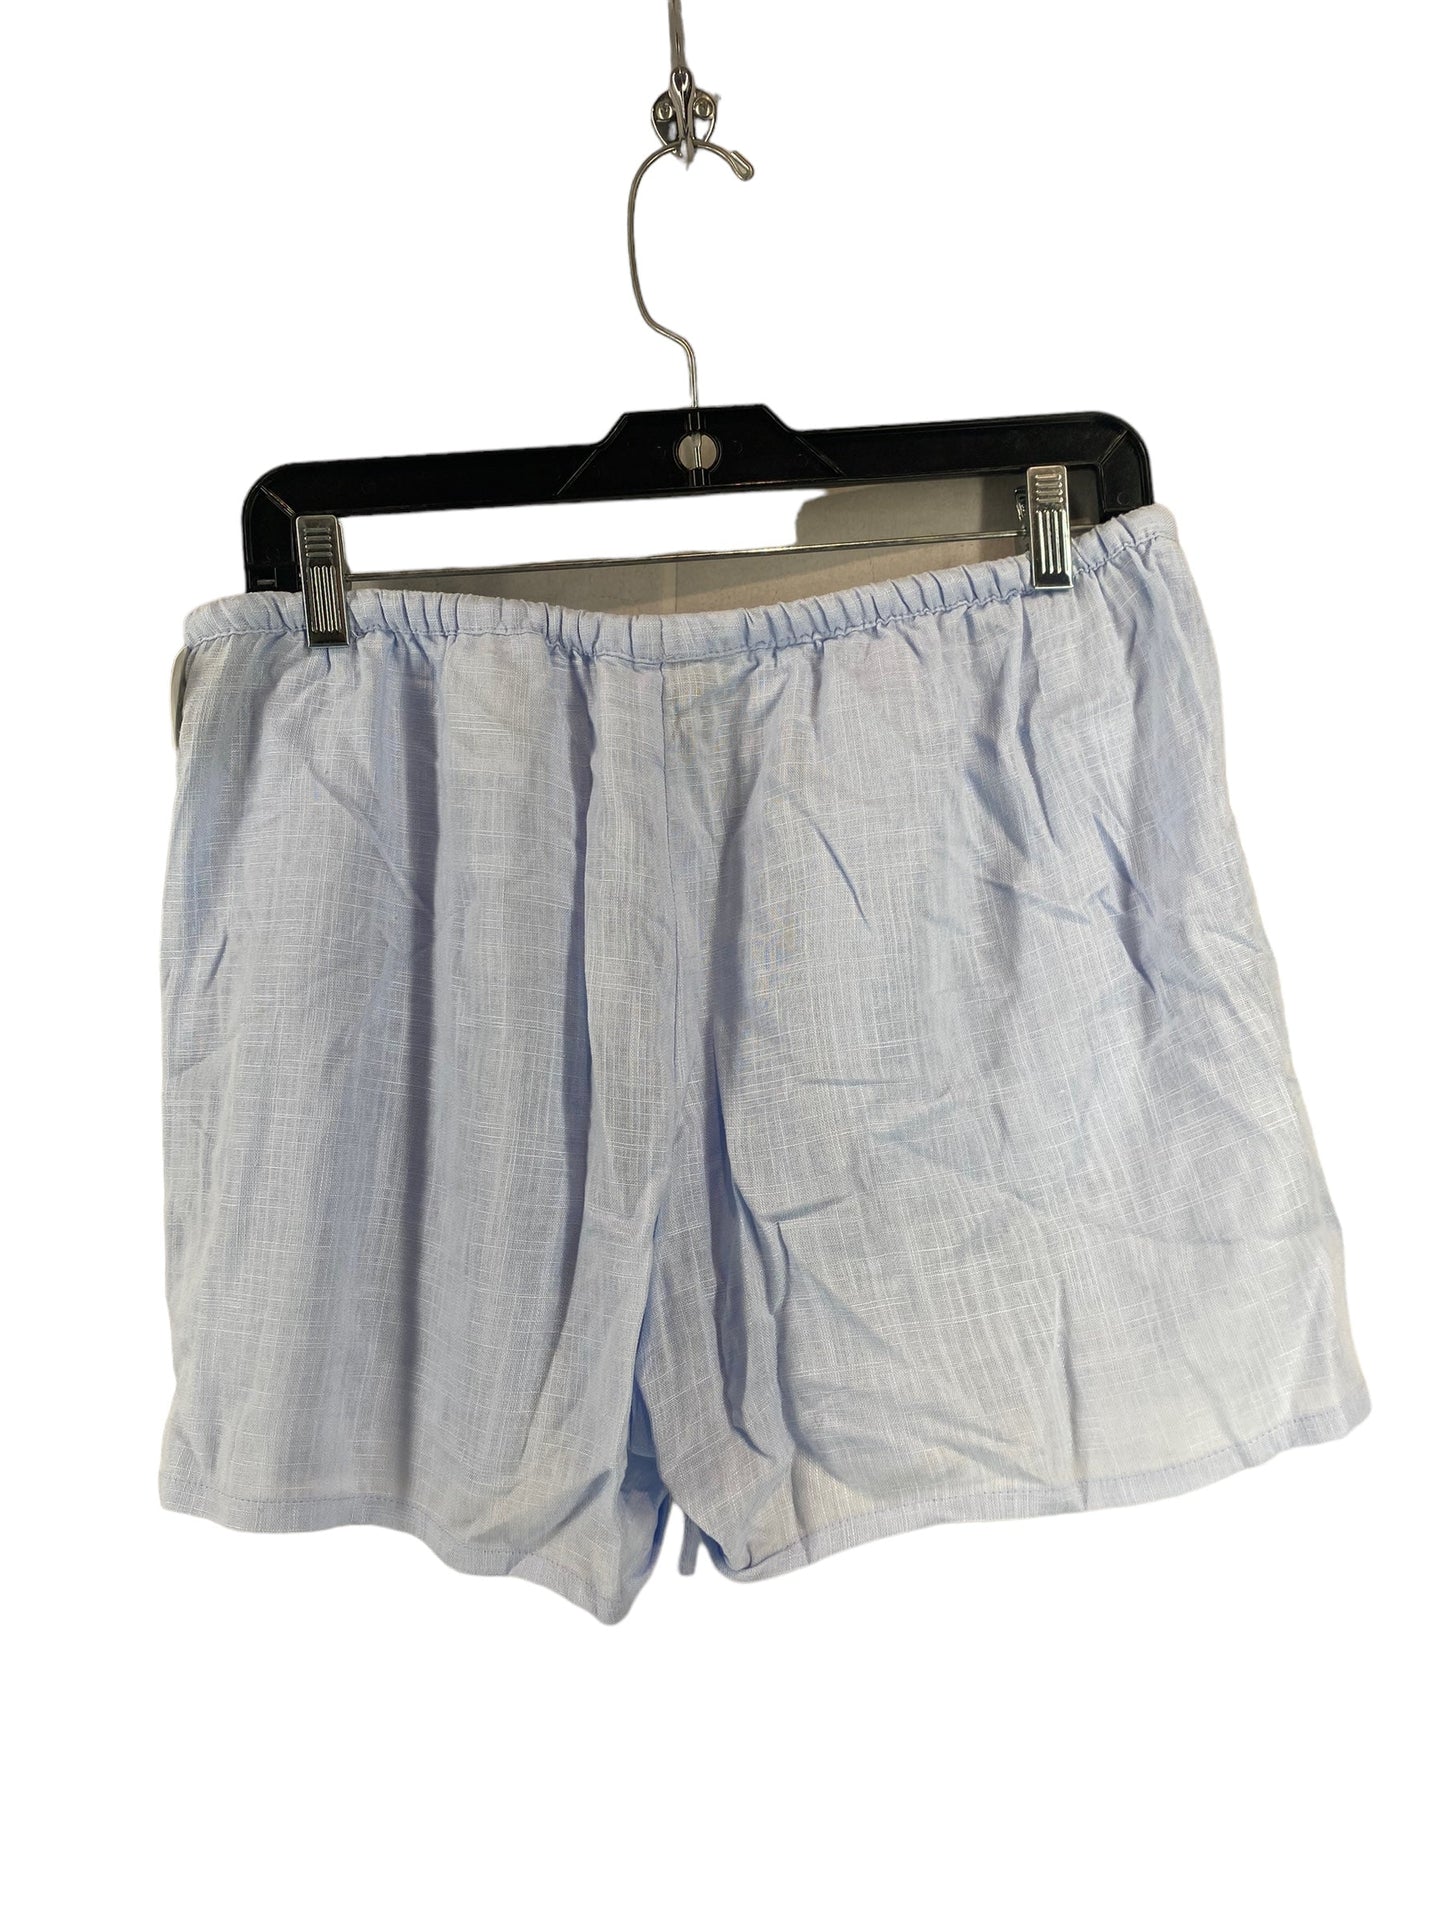 Shorts By Divided  Size: M